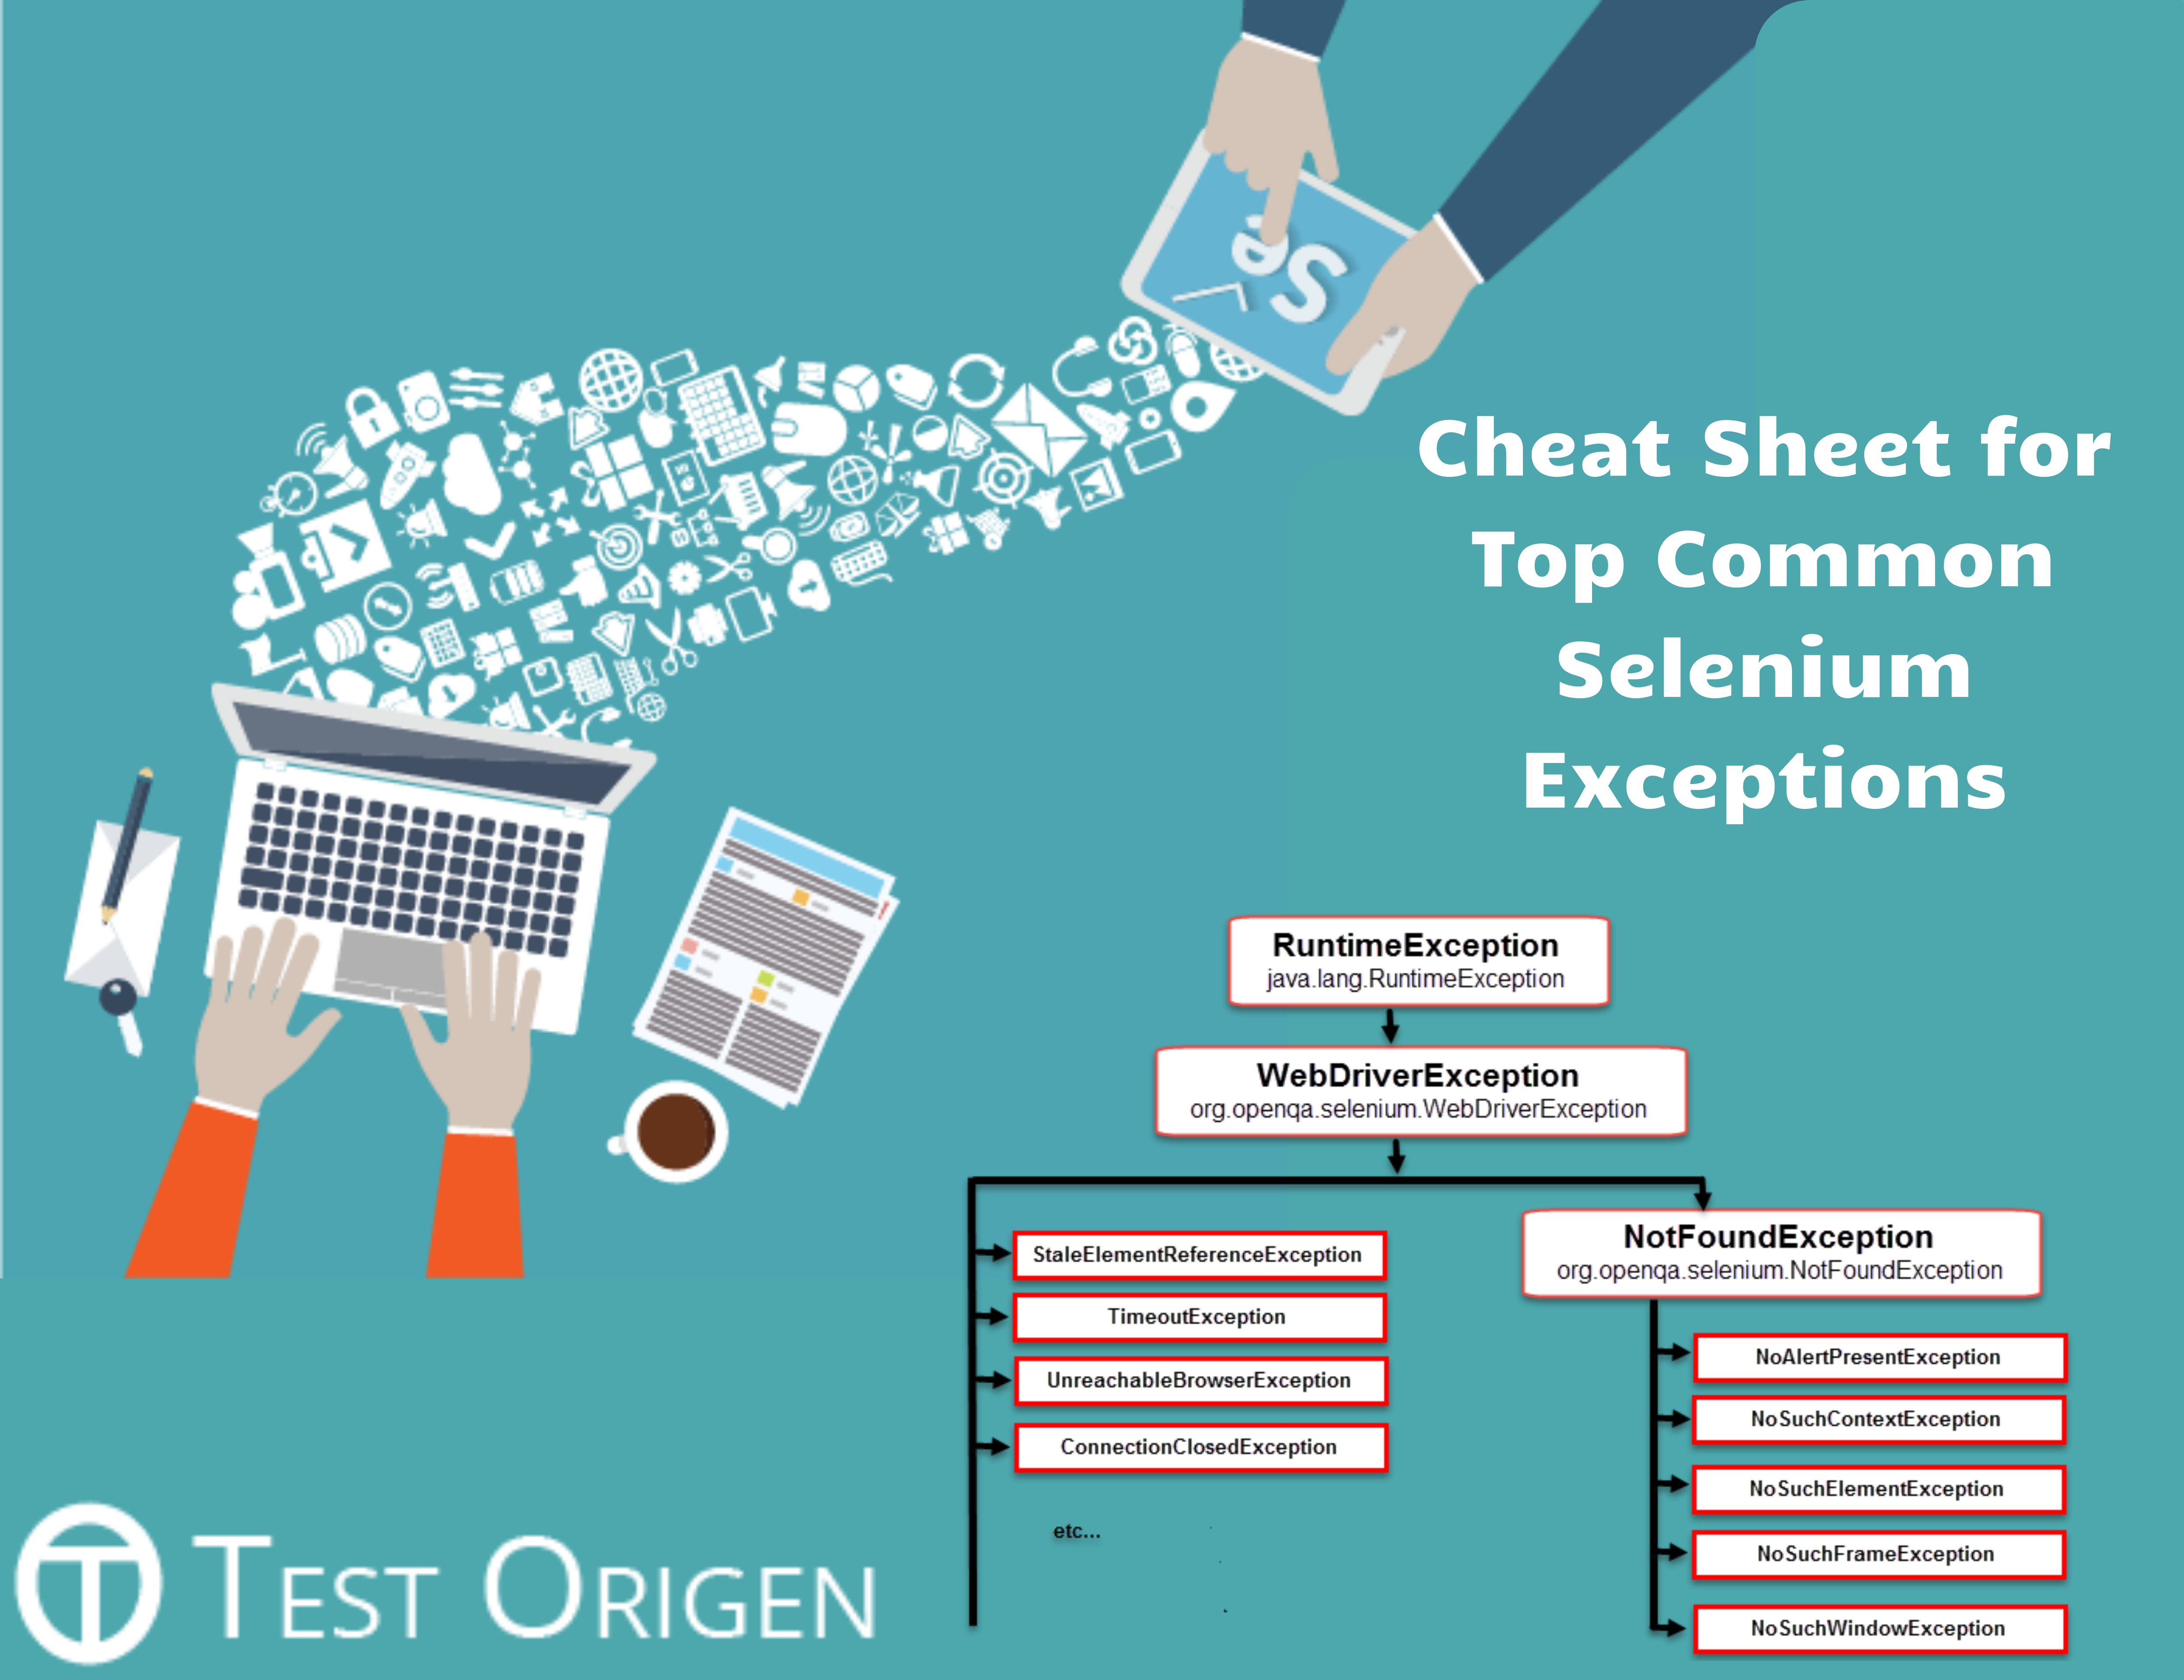 Cheat Sheet for Top Common Selenium Exceptions